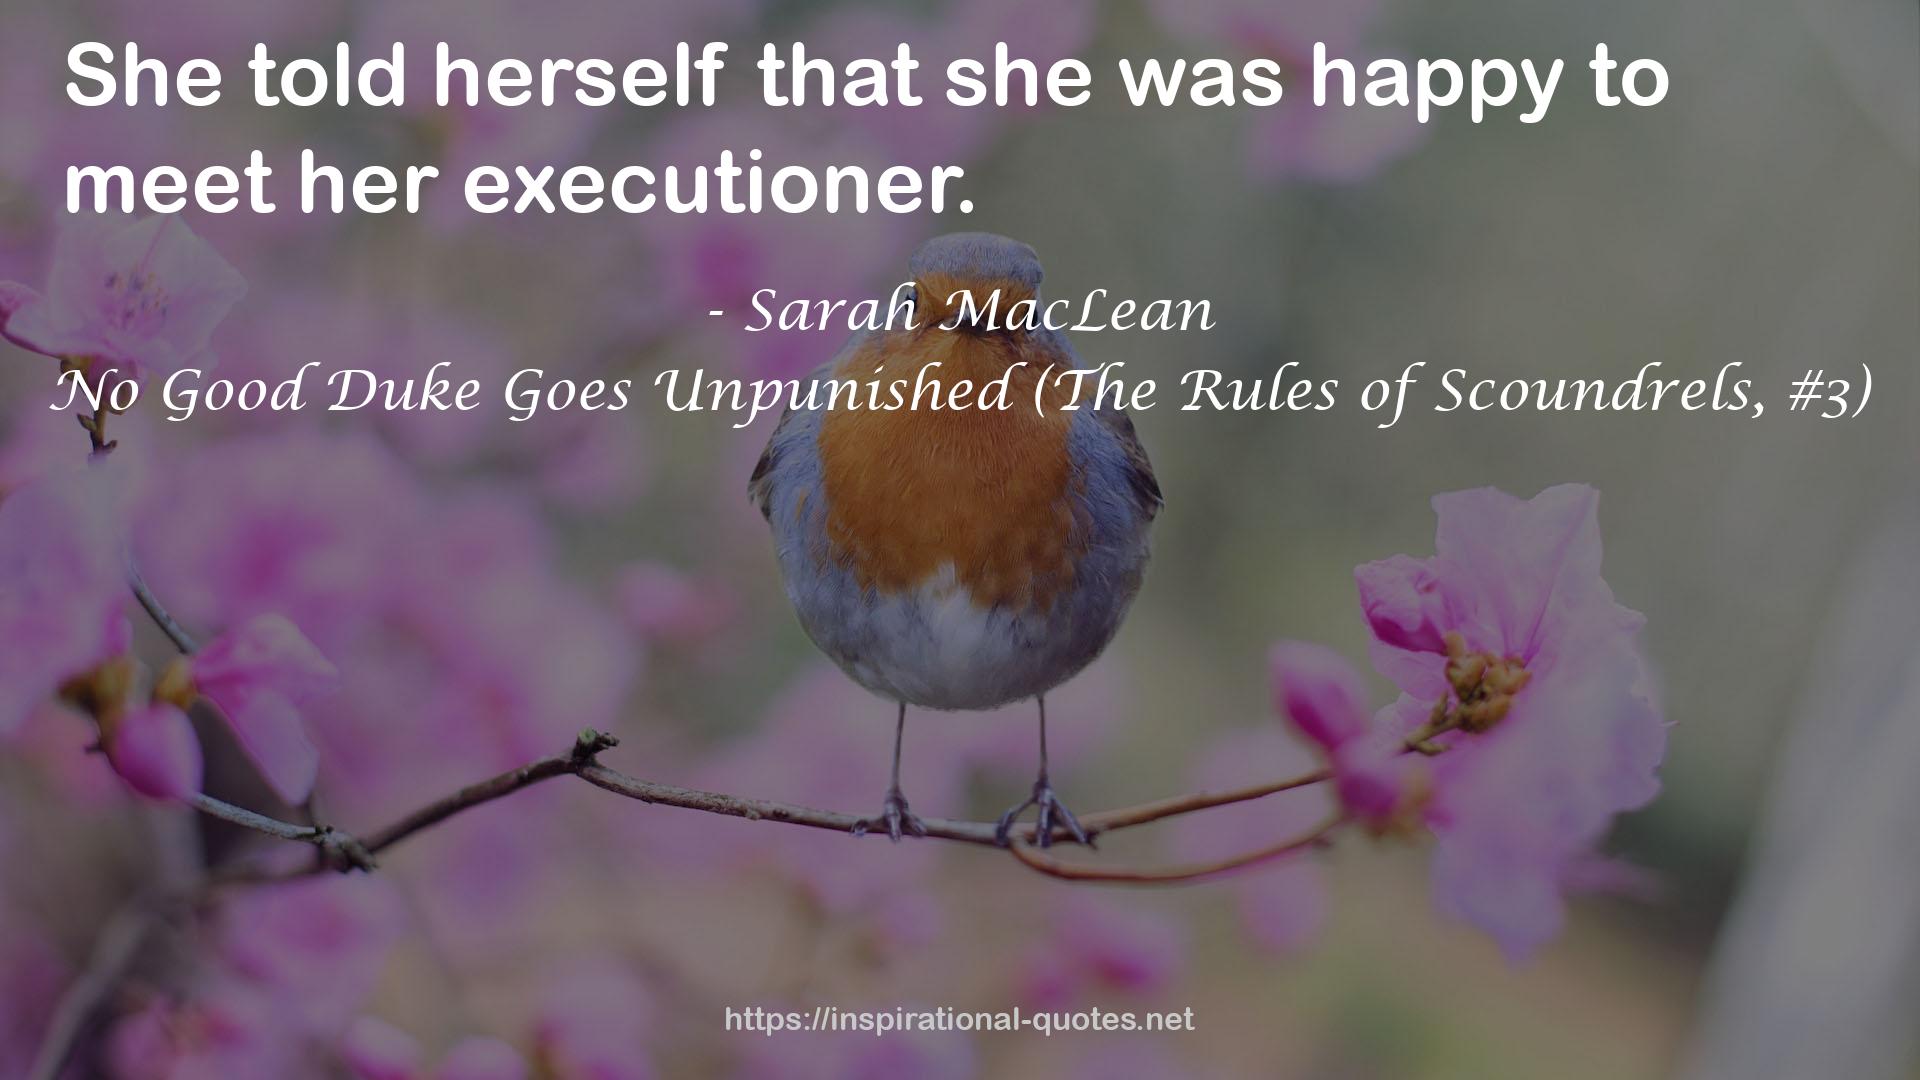 No Good Duke Goes Unpunished (The Rules of Scoundrels, #3) QUOTES